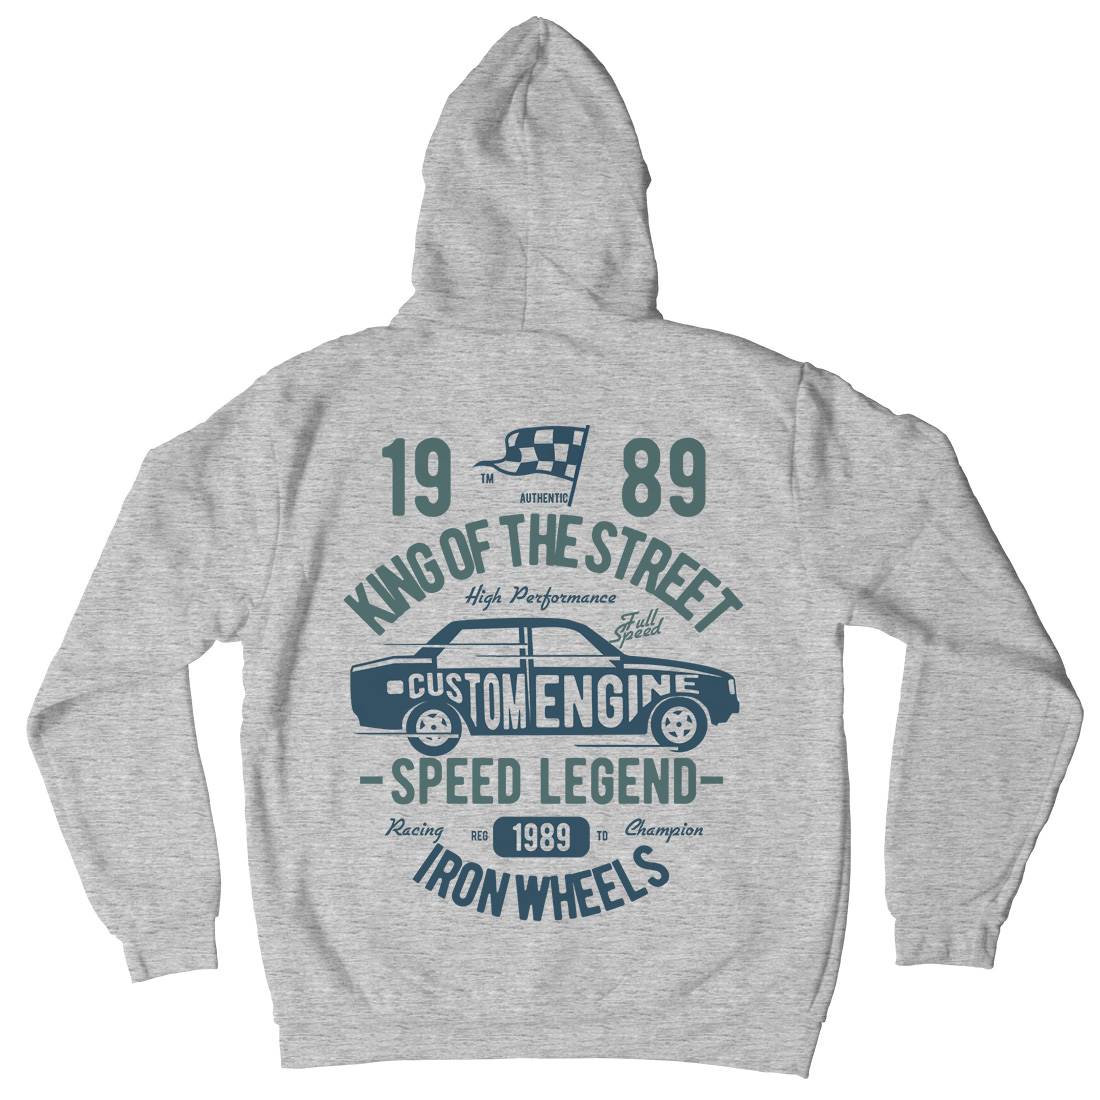 King Of The Street Mens Hoodie With Pocket Cars B413